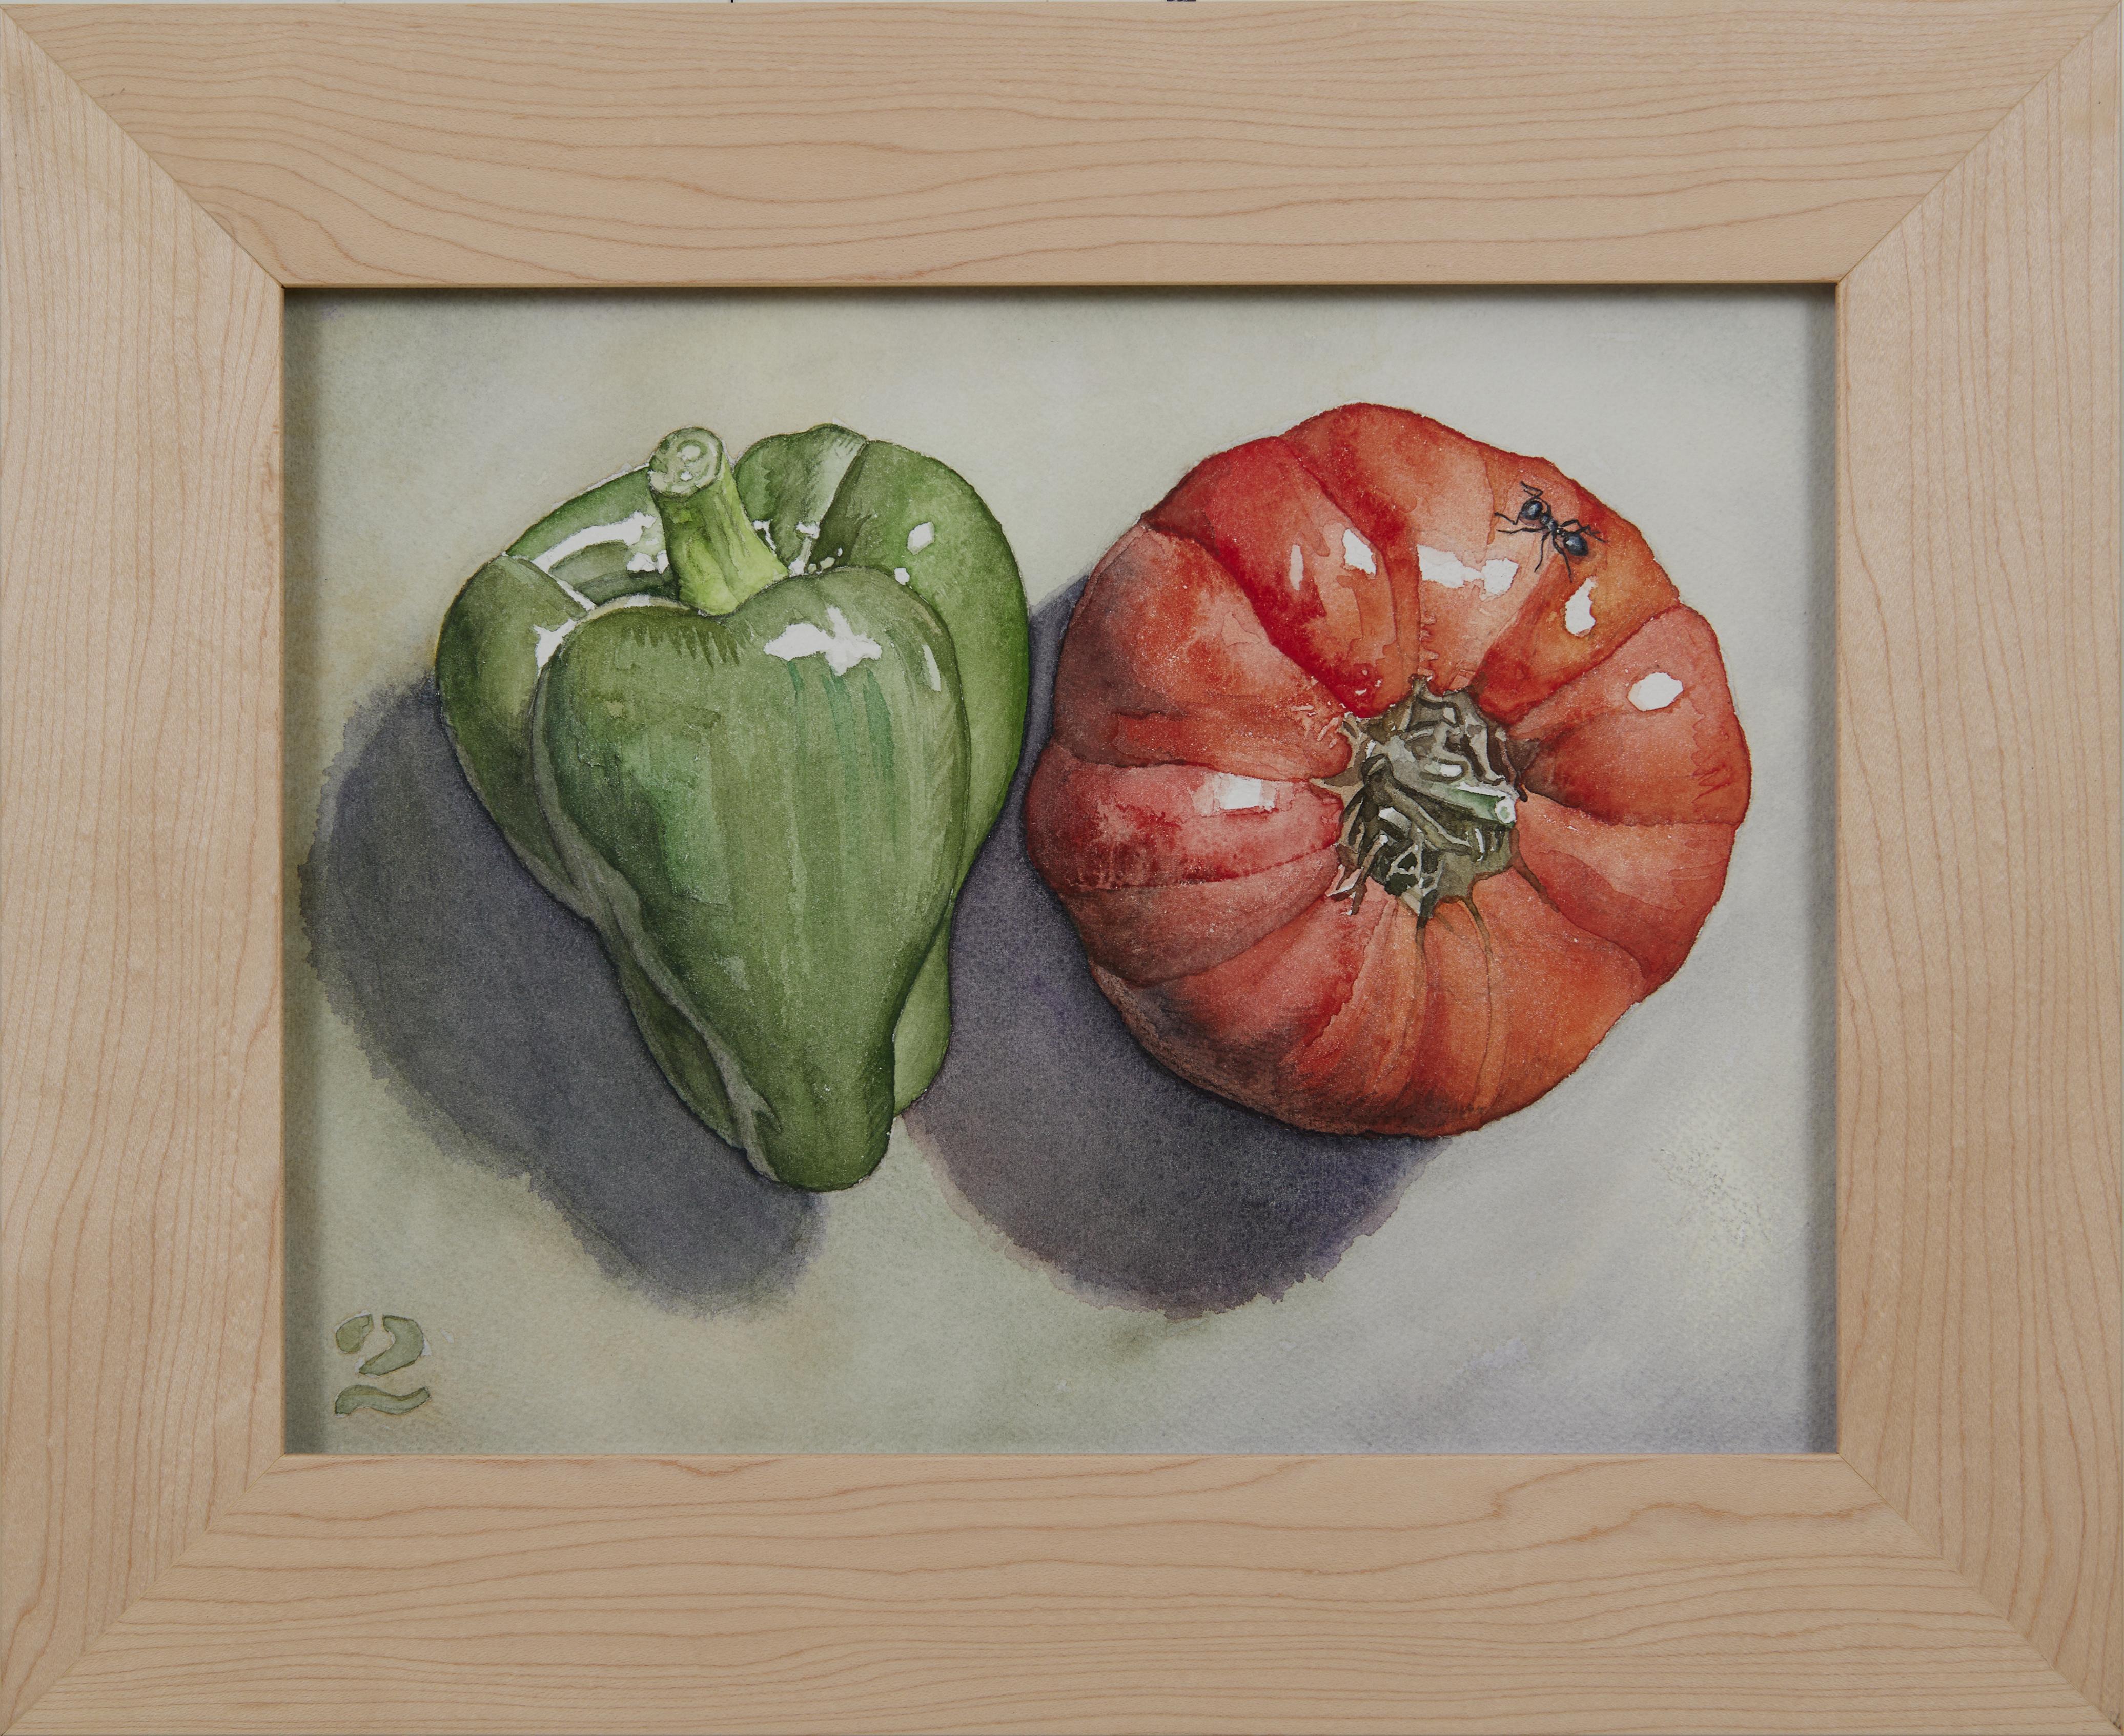 Vegetable Still Life No. 2, Contemporary watercolor by Ohio trompe l'oeil artist - Art by George Mauersberger